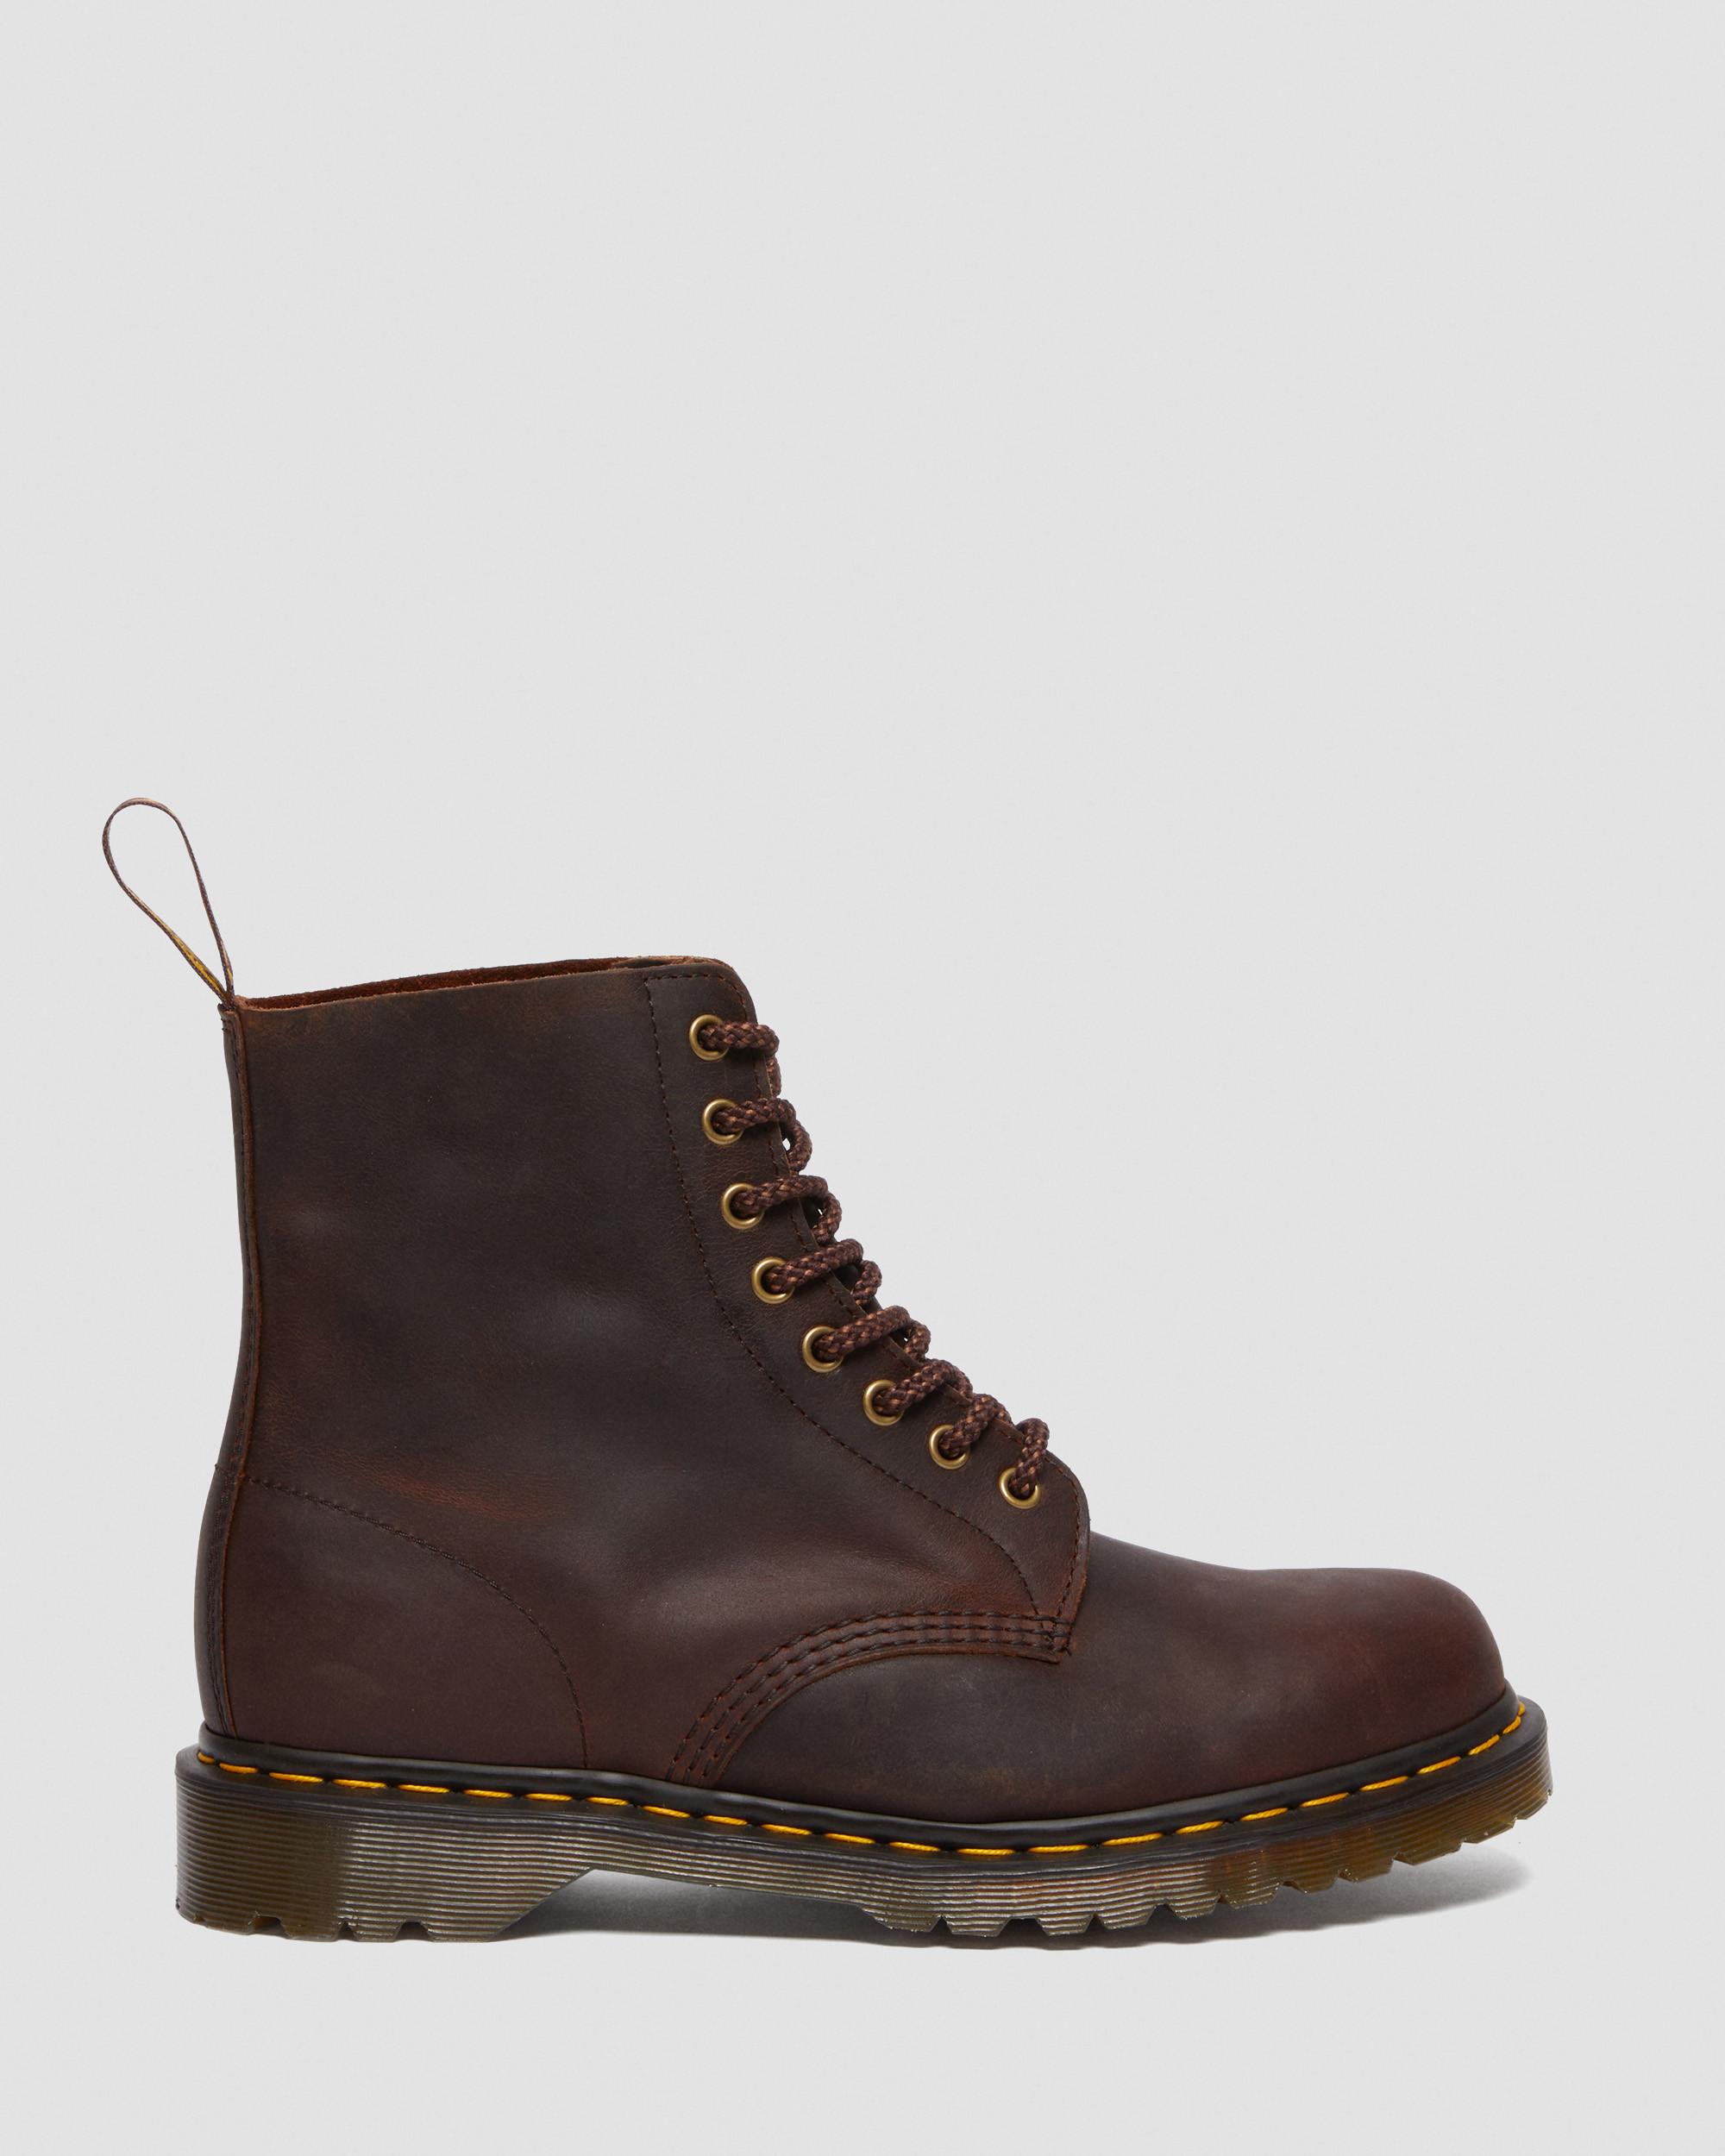 Literacy Prøve rulle 1460 Pascal Waxed Full Grain Leather Lace Up Boots | Dr. Martens